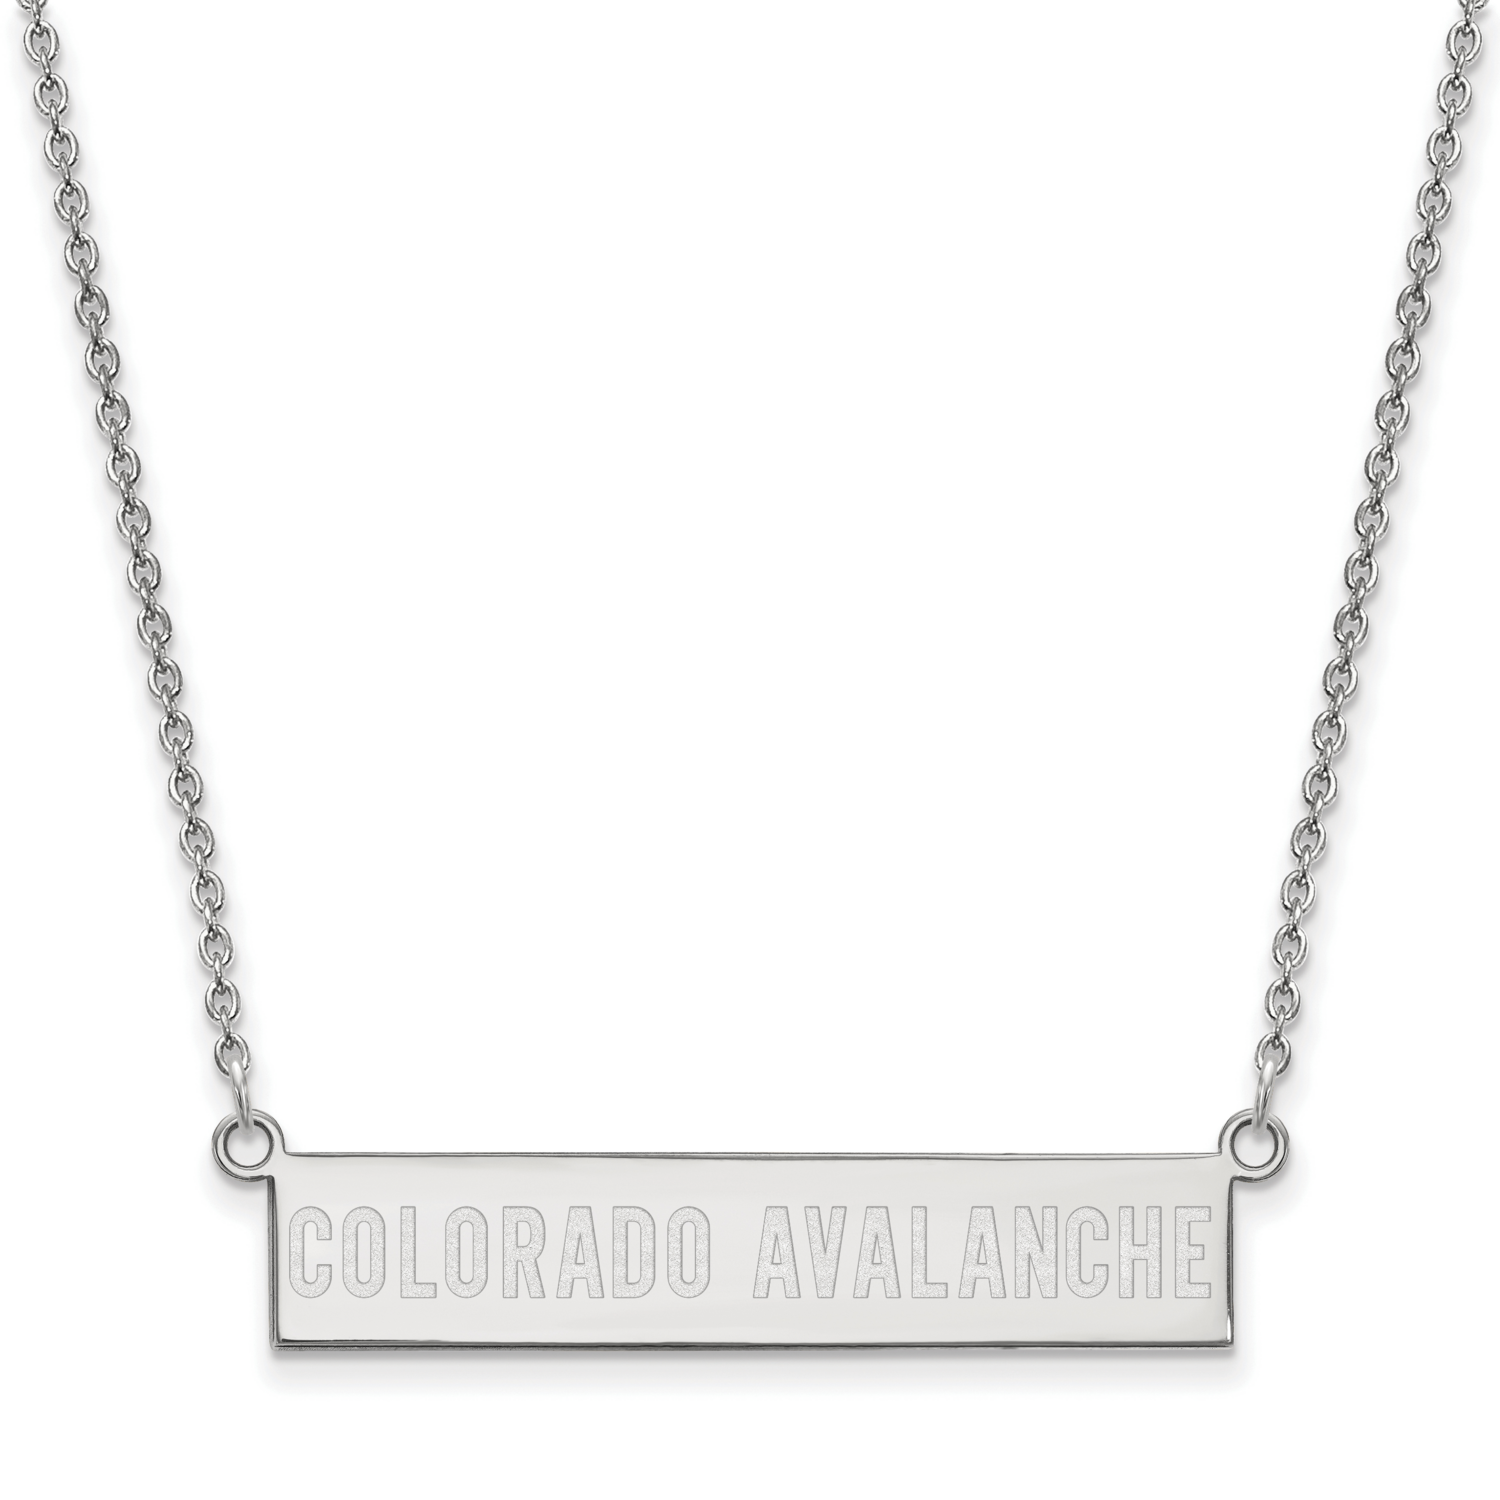 Colorado Avalanche Small Bar Necklace Sterling Silver Rhodium-plated SS024AVA-18